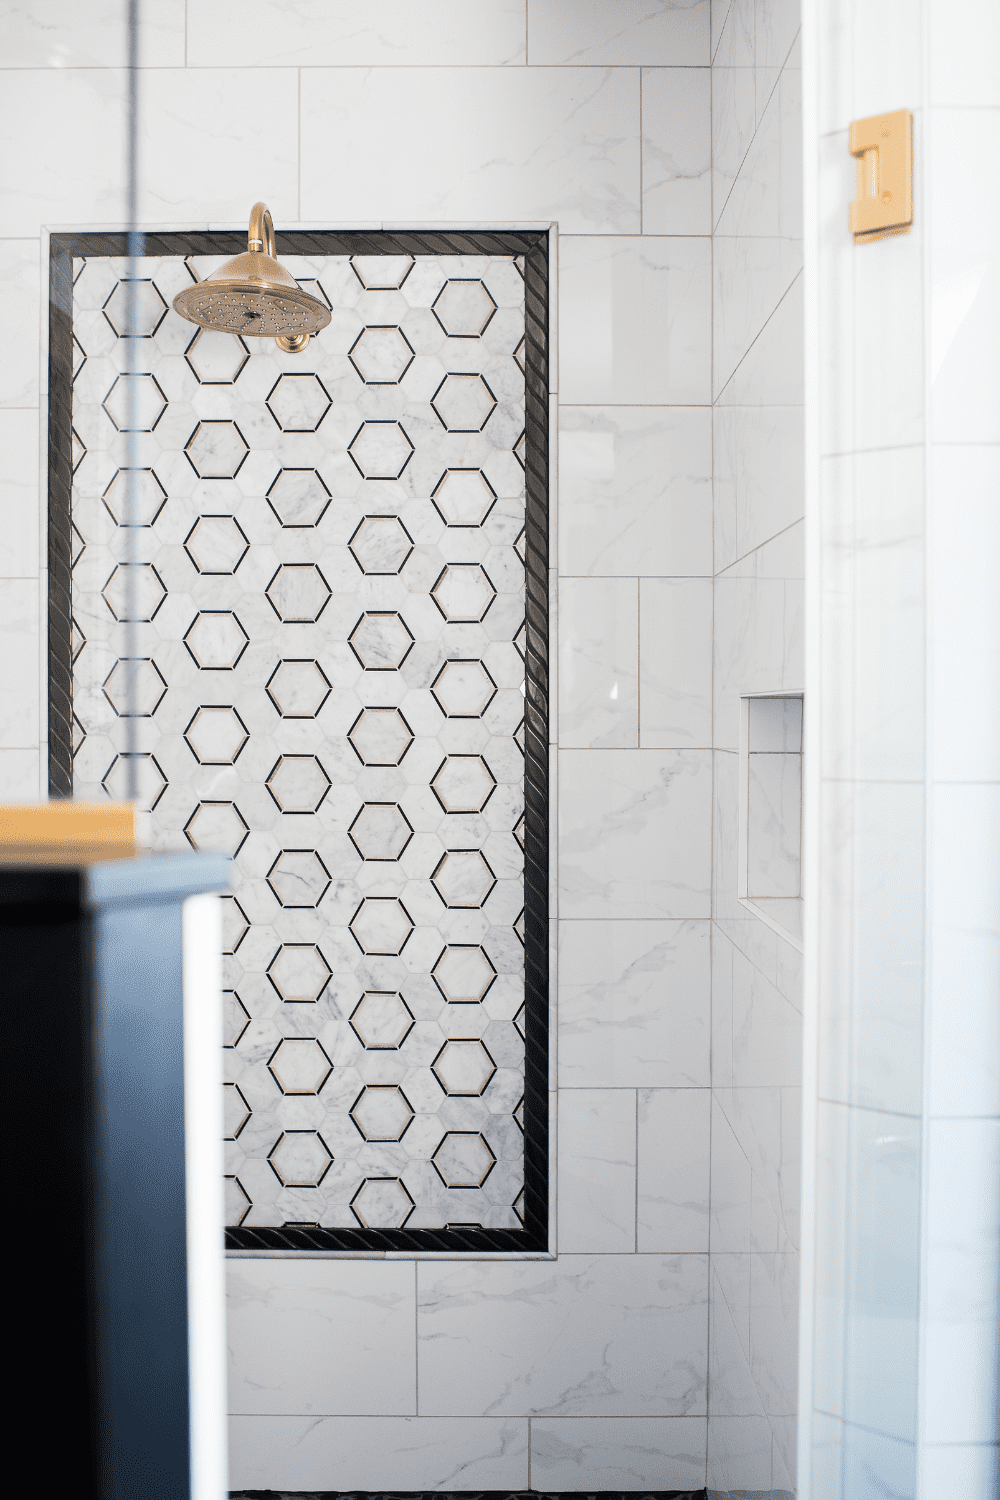 Nicholas Design Build | A bathroom with a black and white tiled shower.